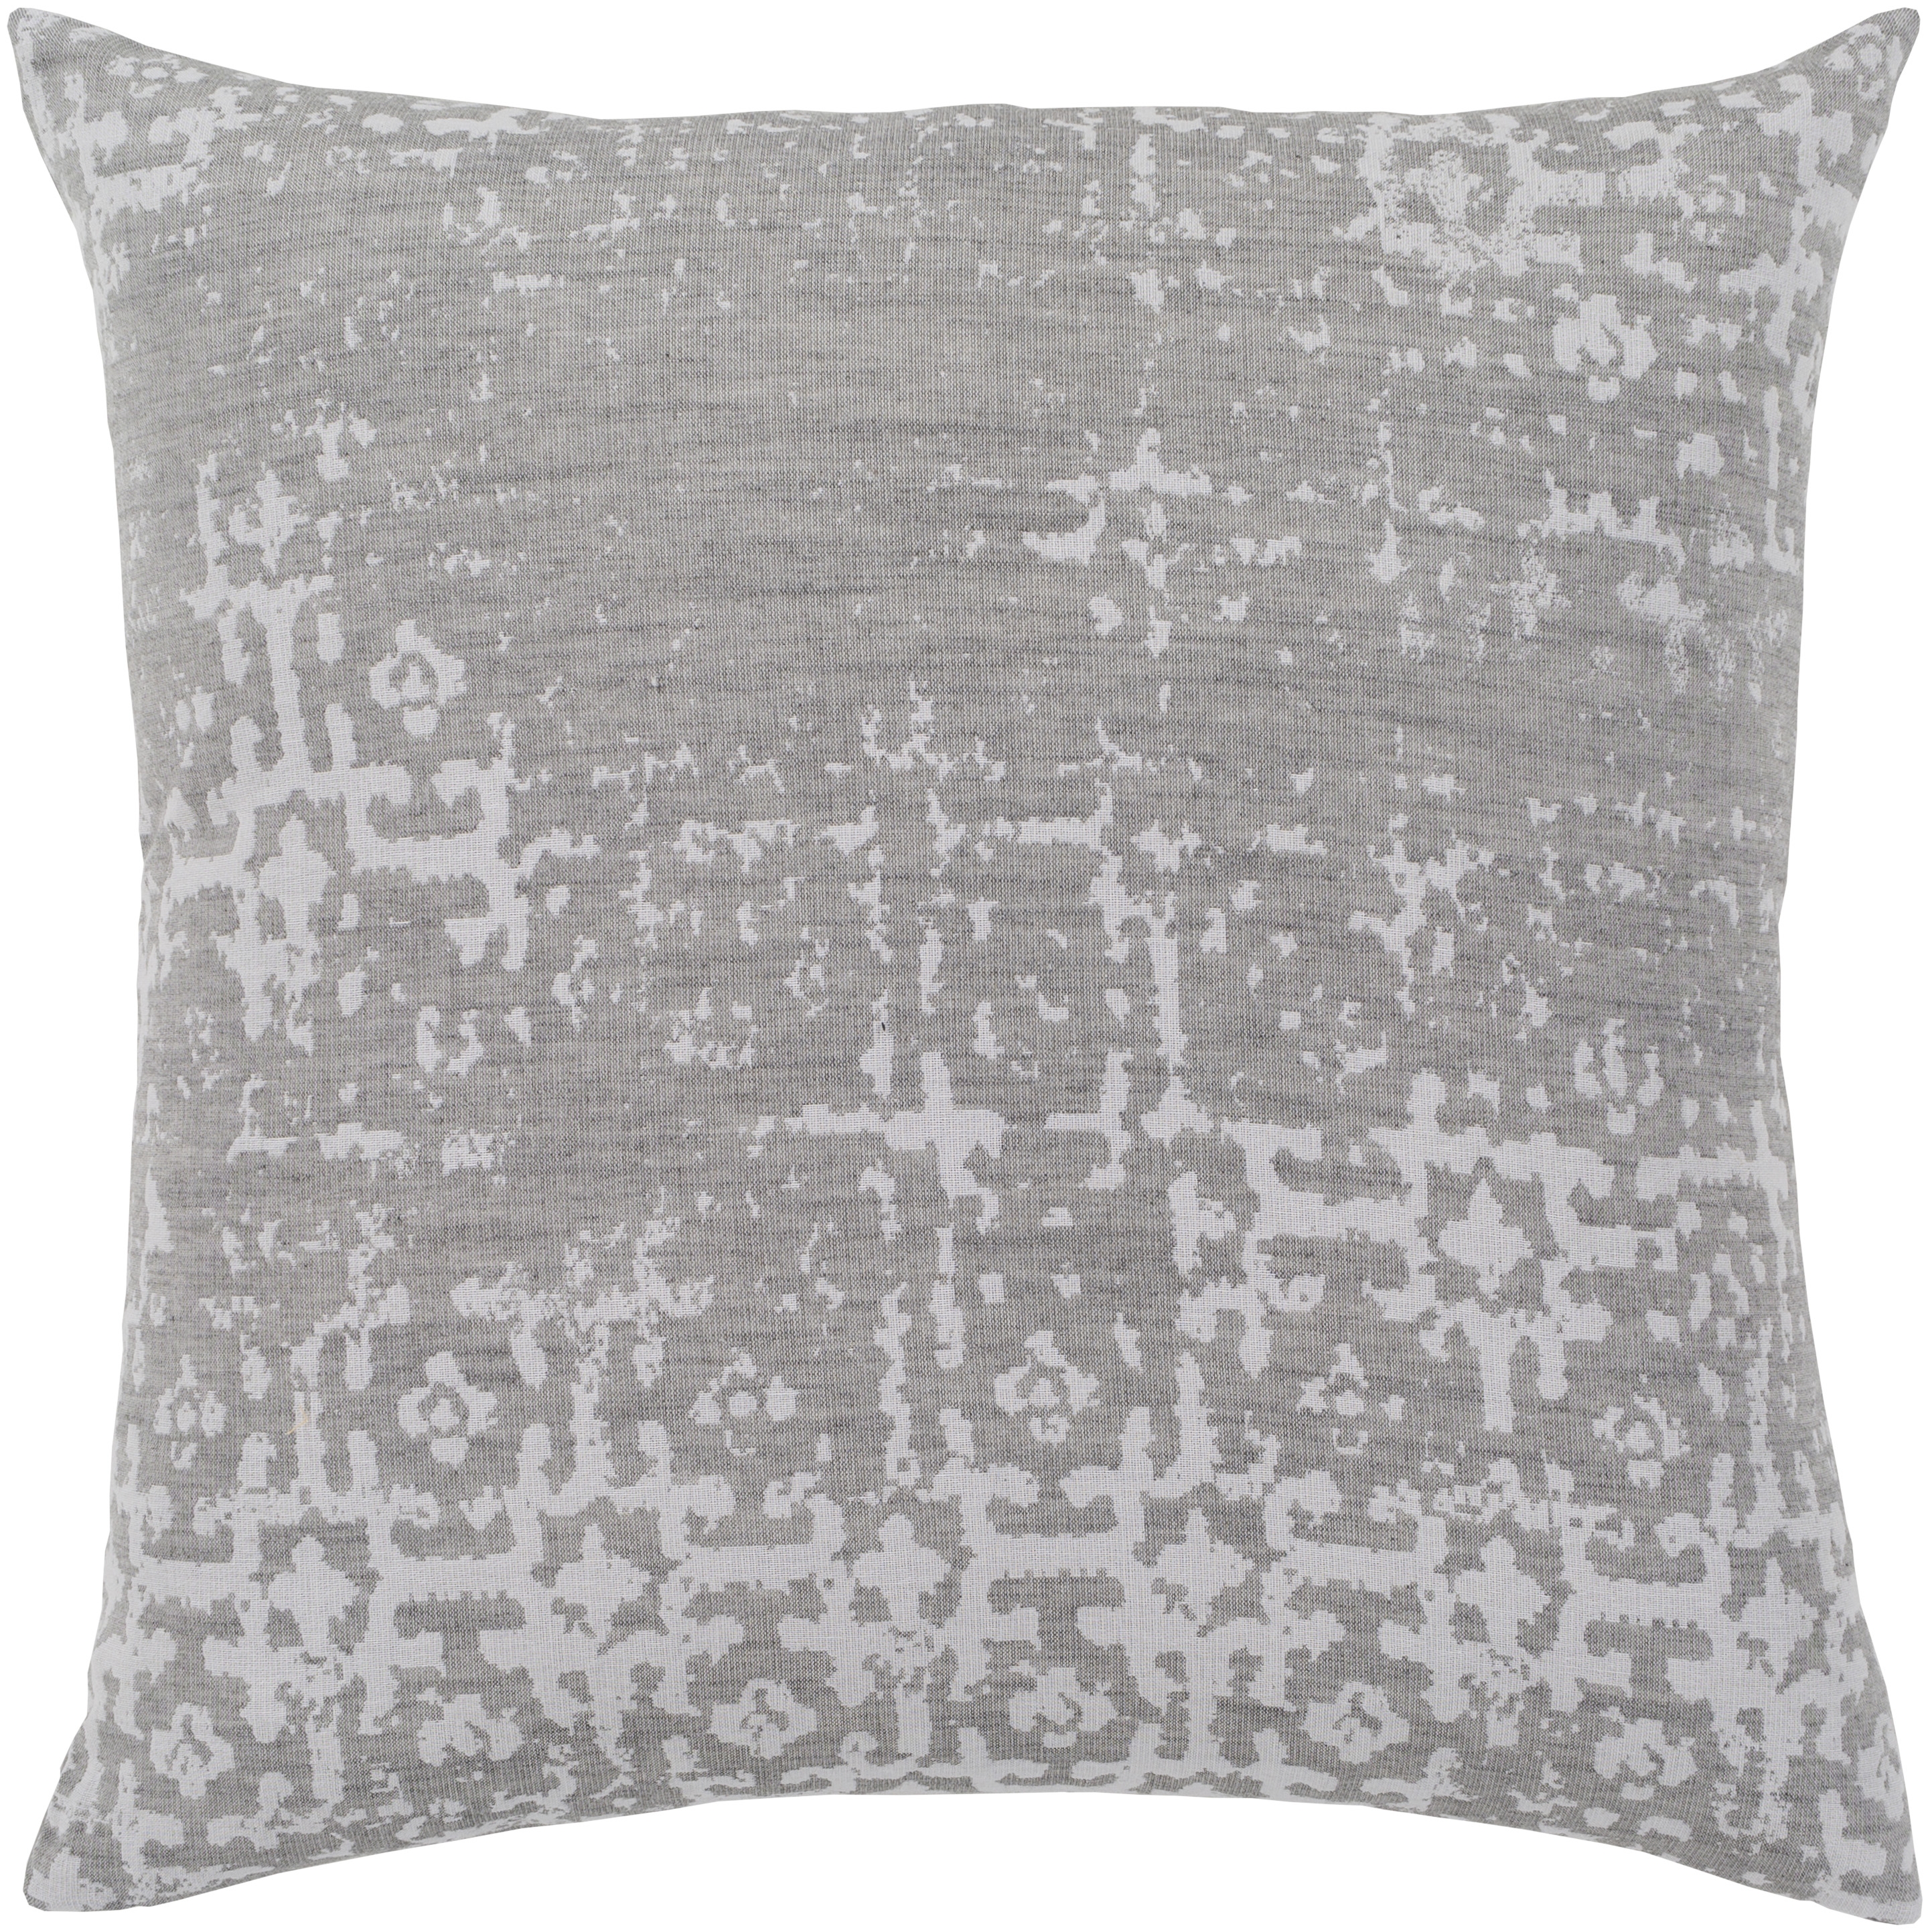 Abstraction Throw Pillow, 18" x 18", with poly insert - Image 0